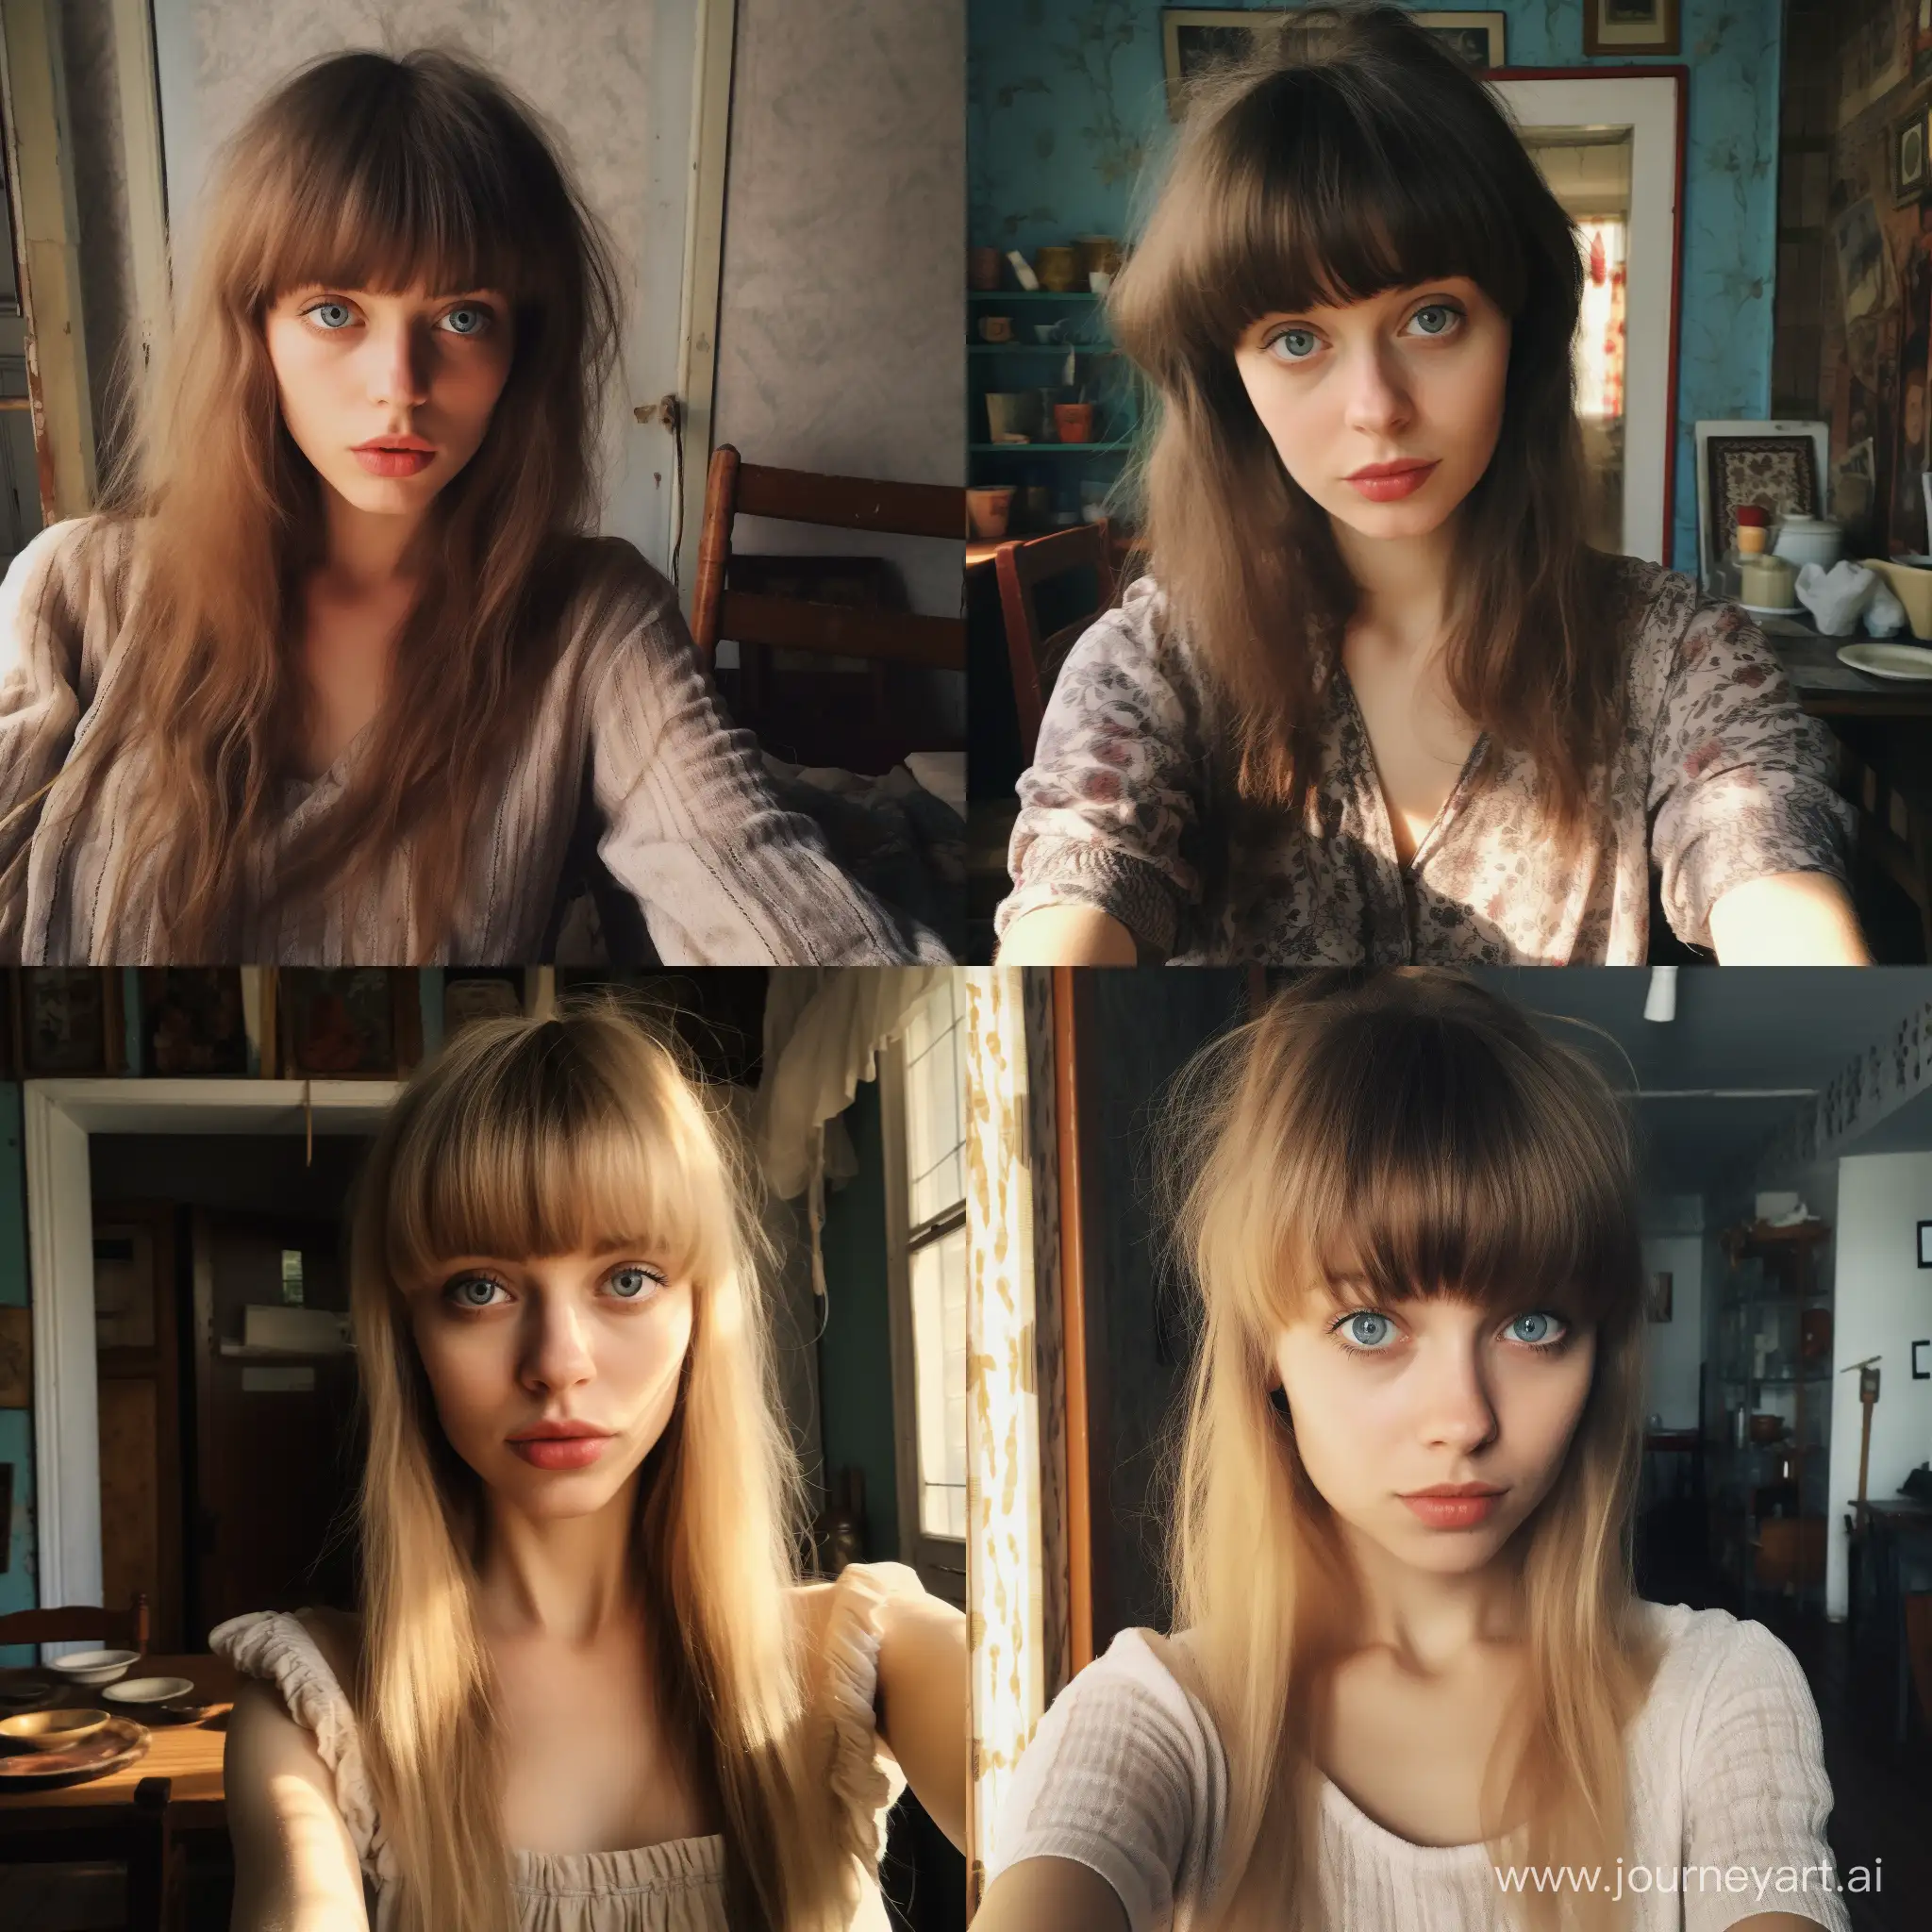 Interior selfie of a woman with small stature, big blue eyes, bangs, two оси, shot on a low camera quality phone